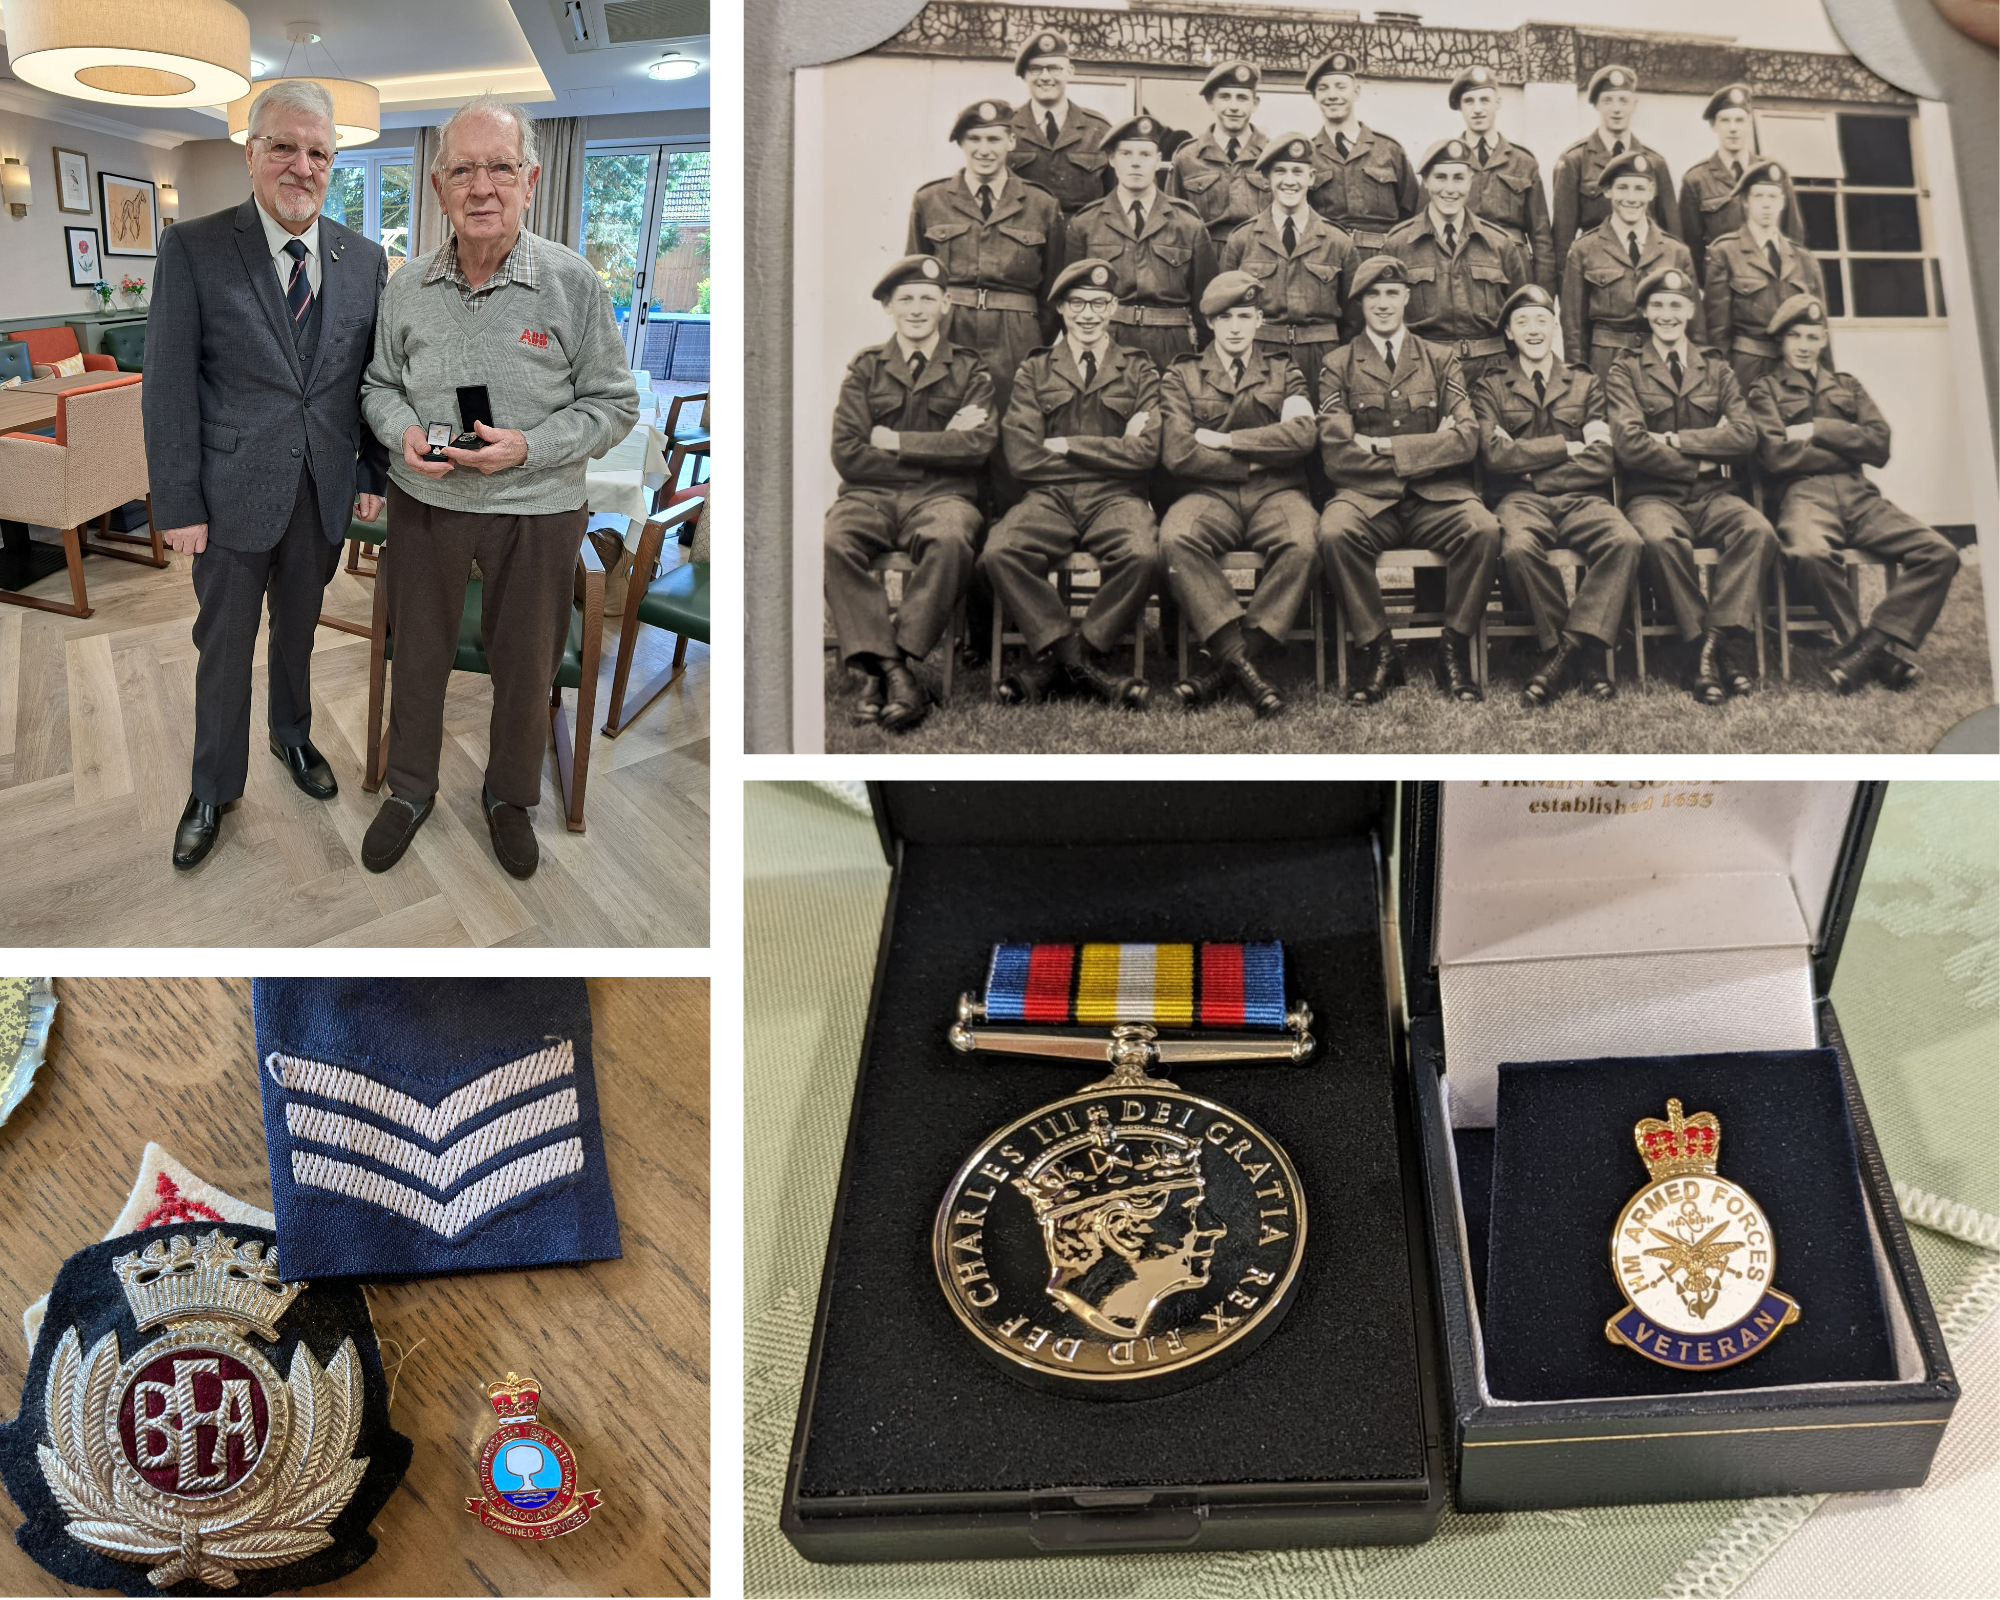 Collage of Peter Powney-Jones - Nuclear Test Medal